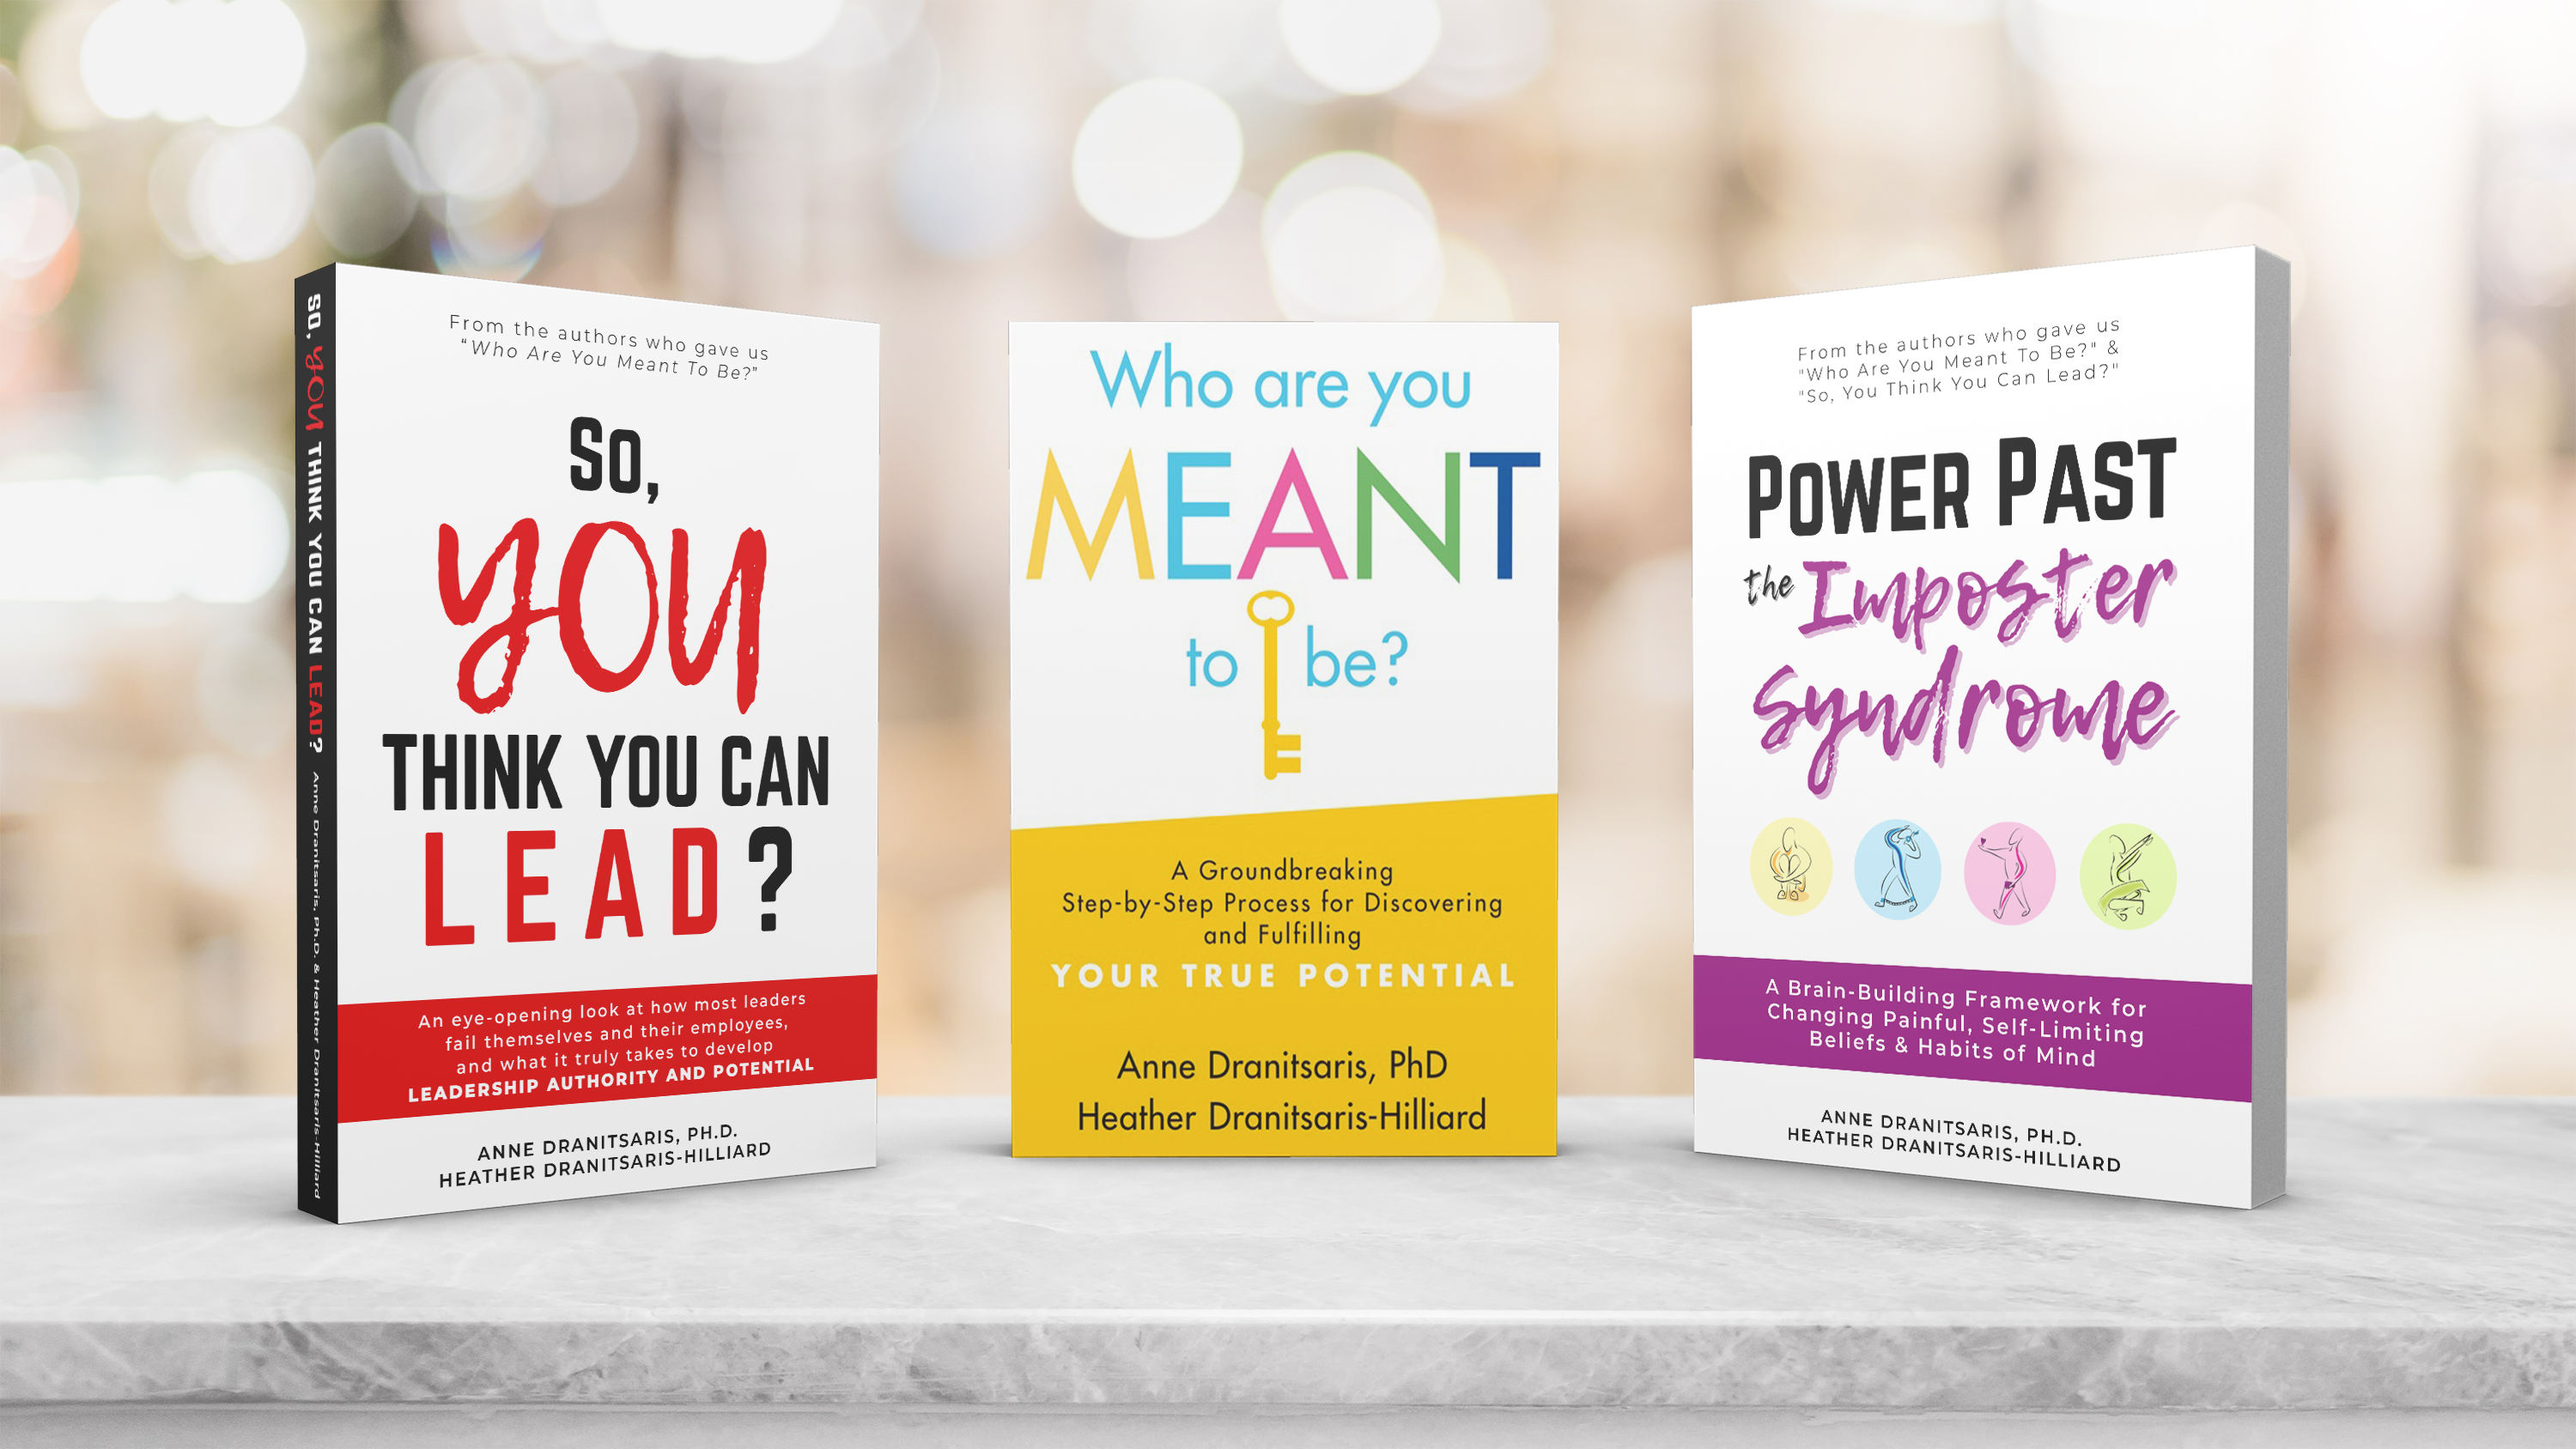 So, You Think You Can Lead  book cover, Who Are You Meant to Be book cover, Power Past the Imposter Syndrome book cover